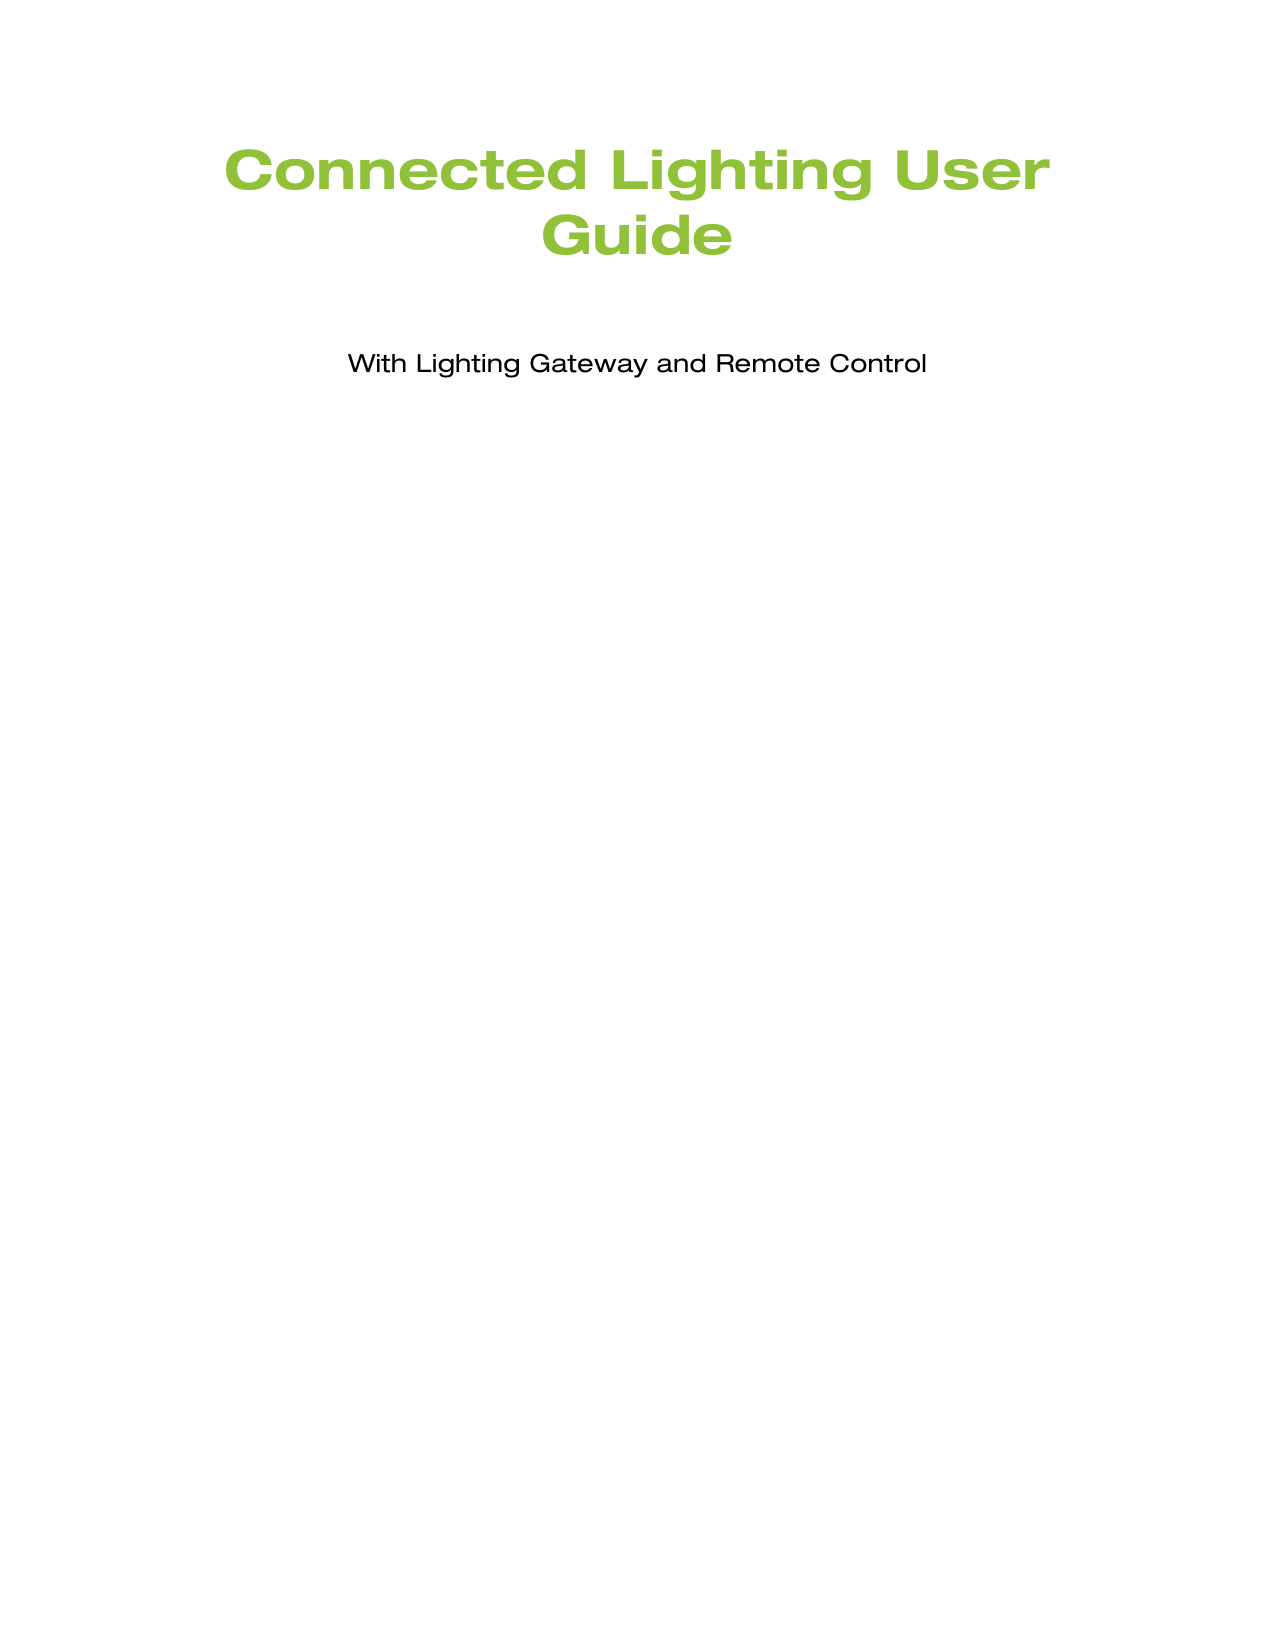 Connected Lighting User GuideWith Lighting Gateway and Remote Control